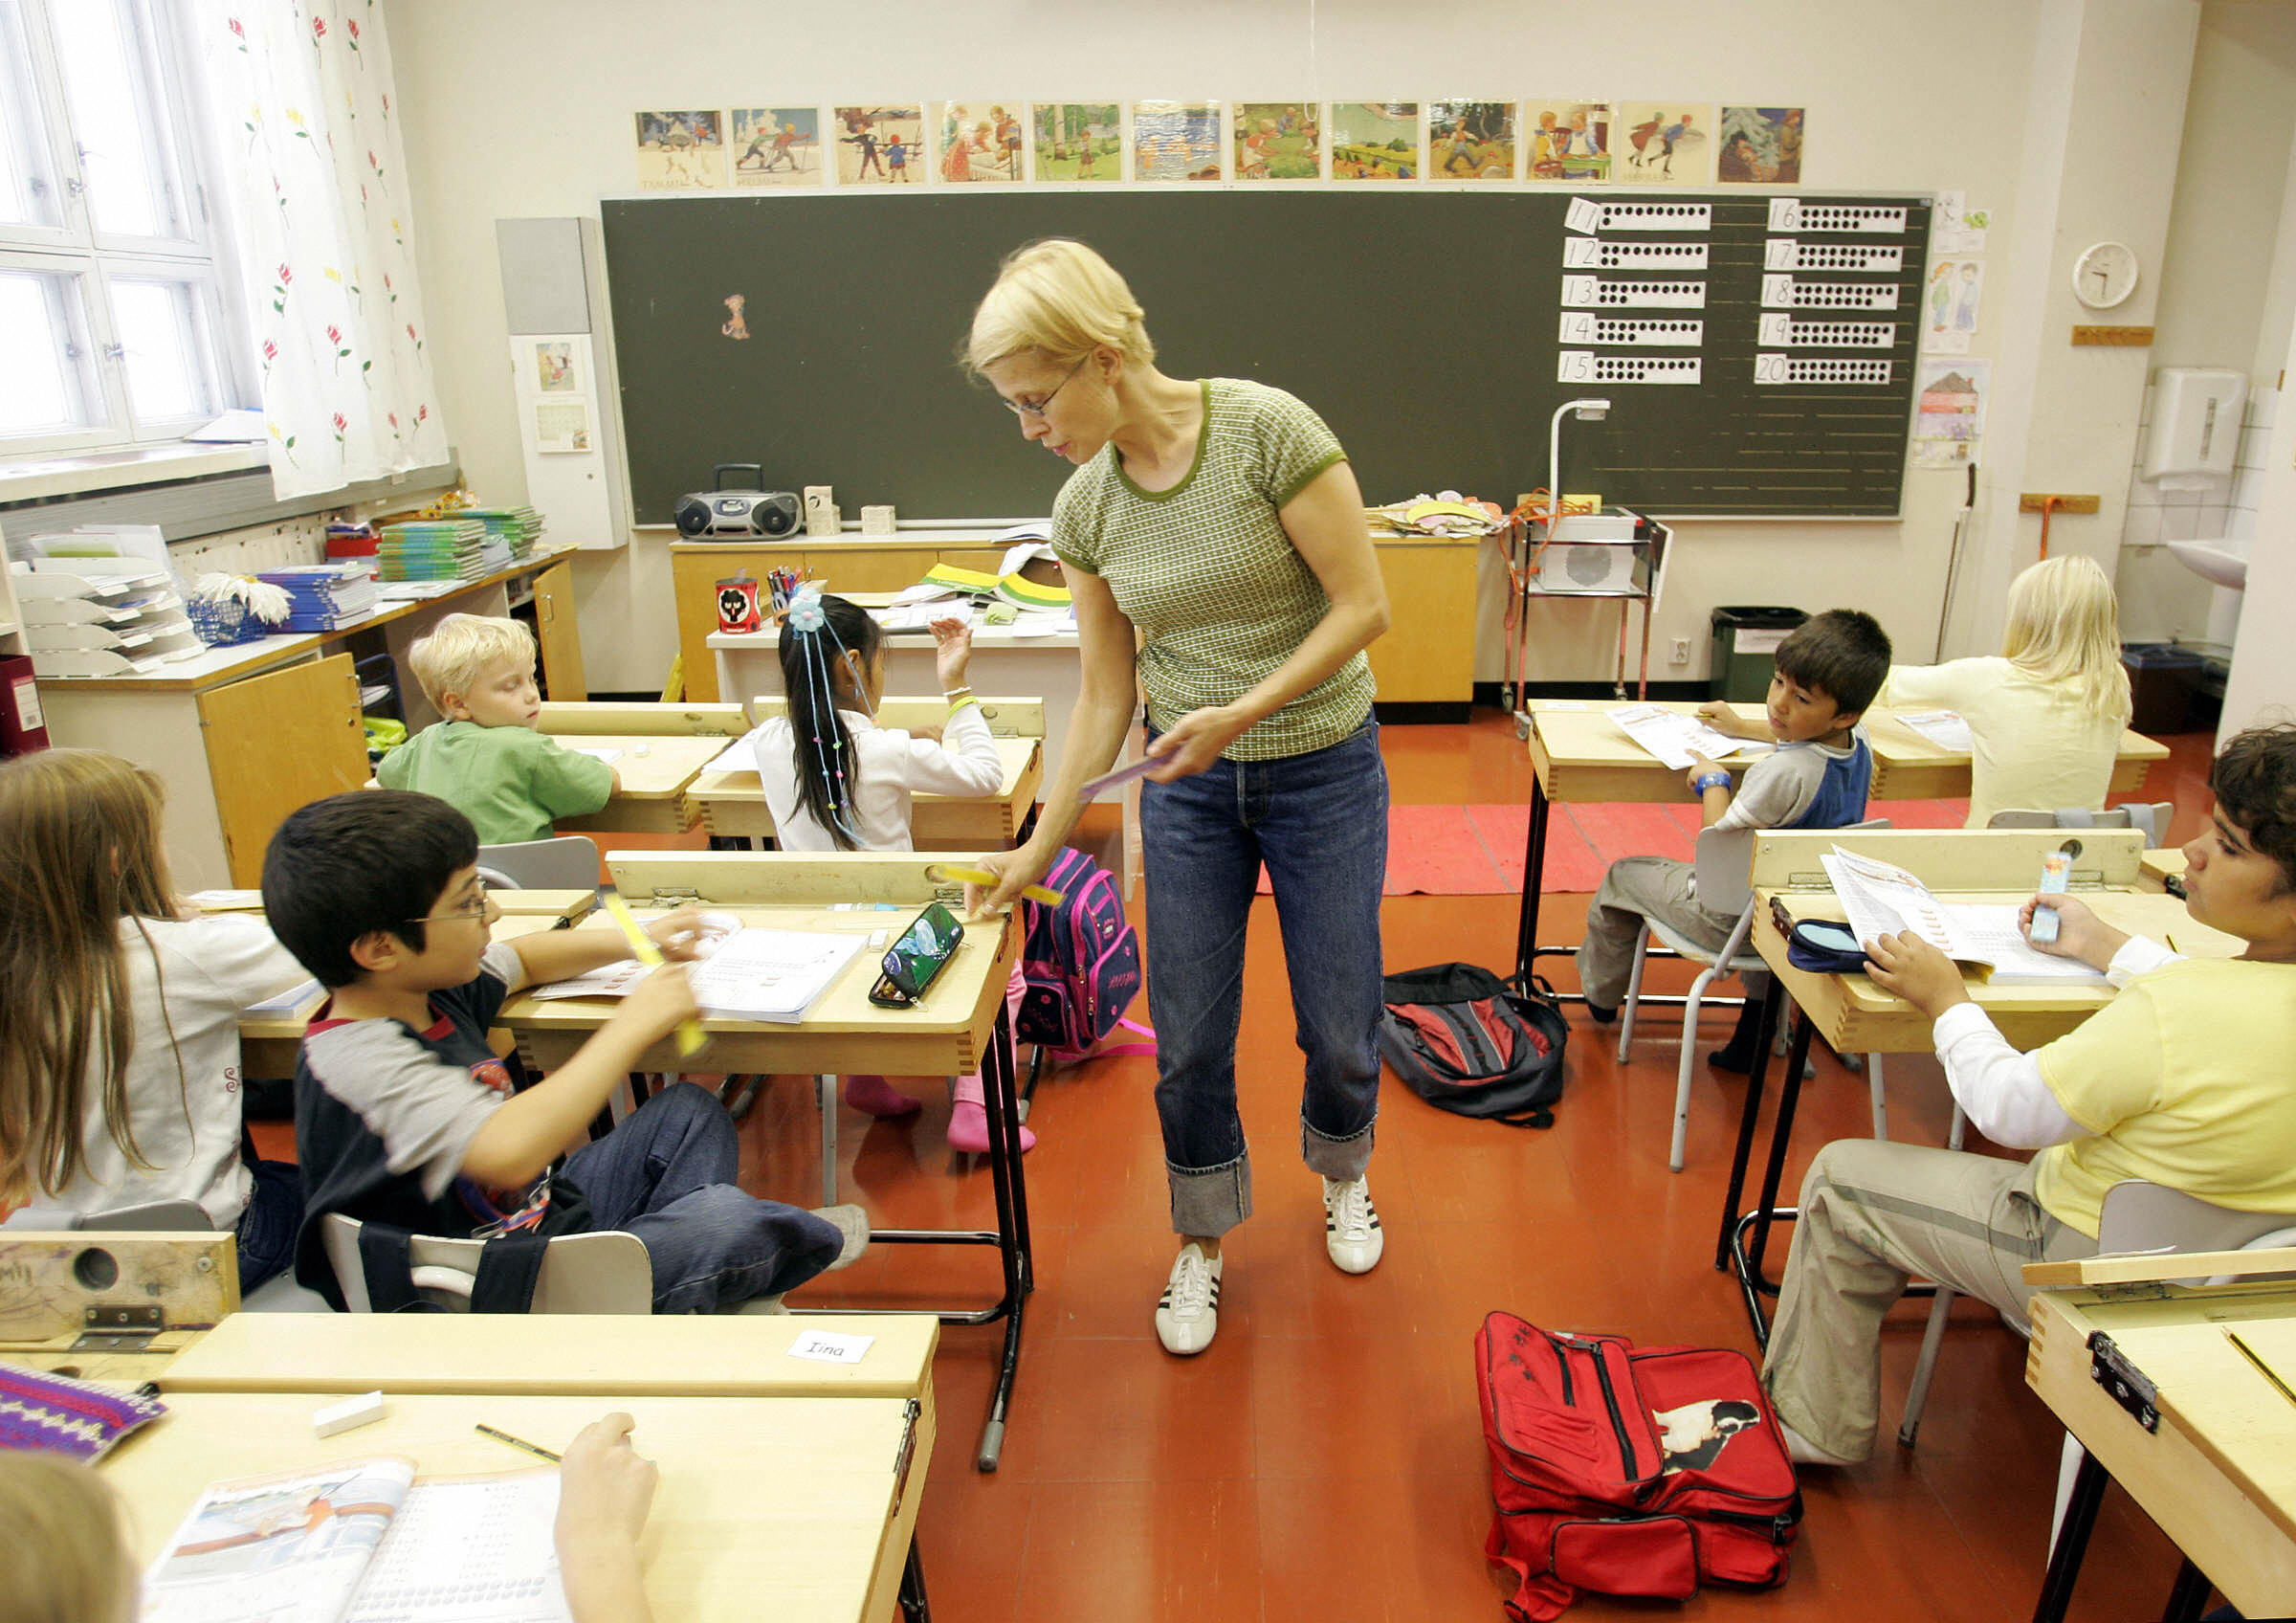 A teacher giving rulers to children&nbsp;in Finland. The Nordic country’s education system is a prime reason it scores at the top of the “Years of Good Life (YoGL)” economic index